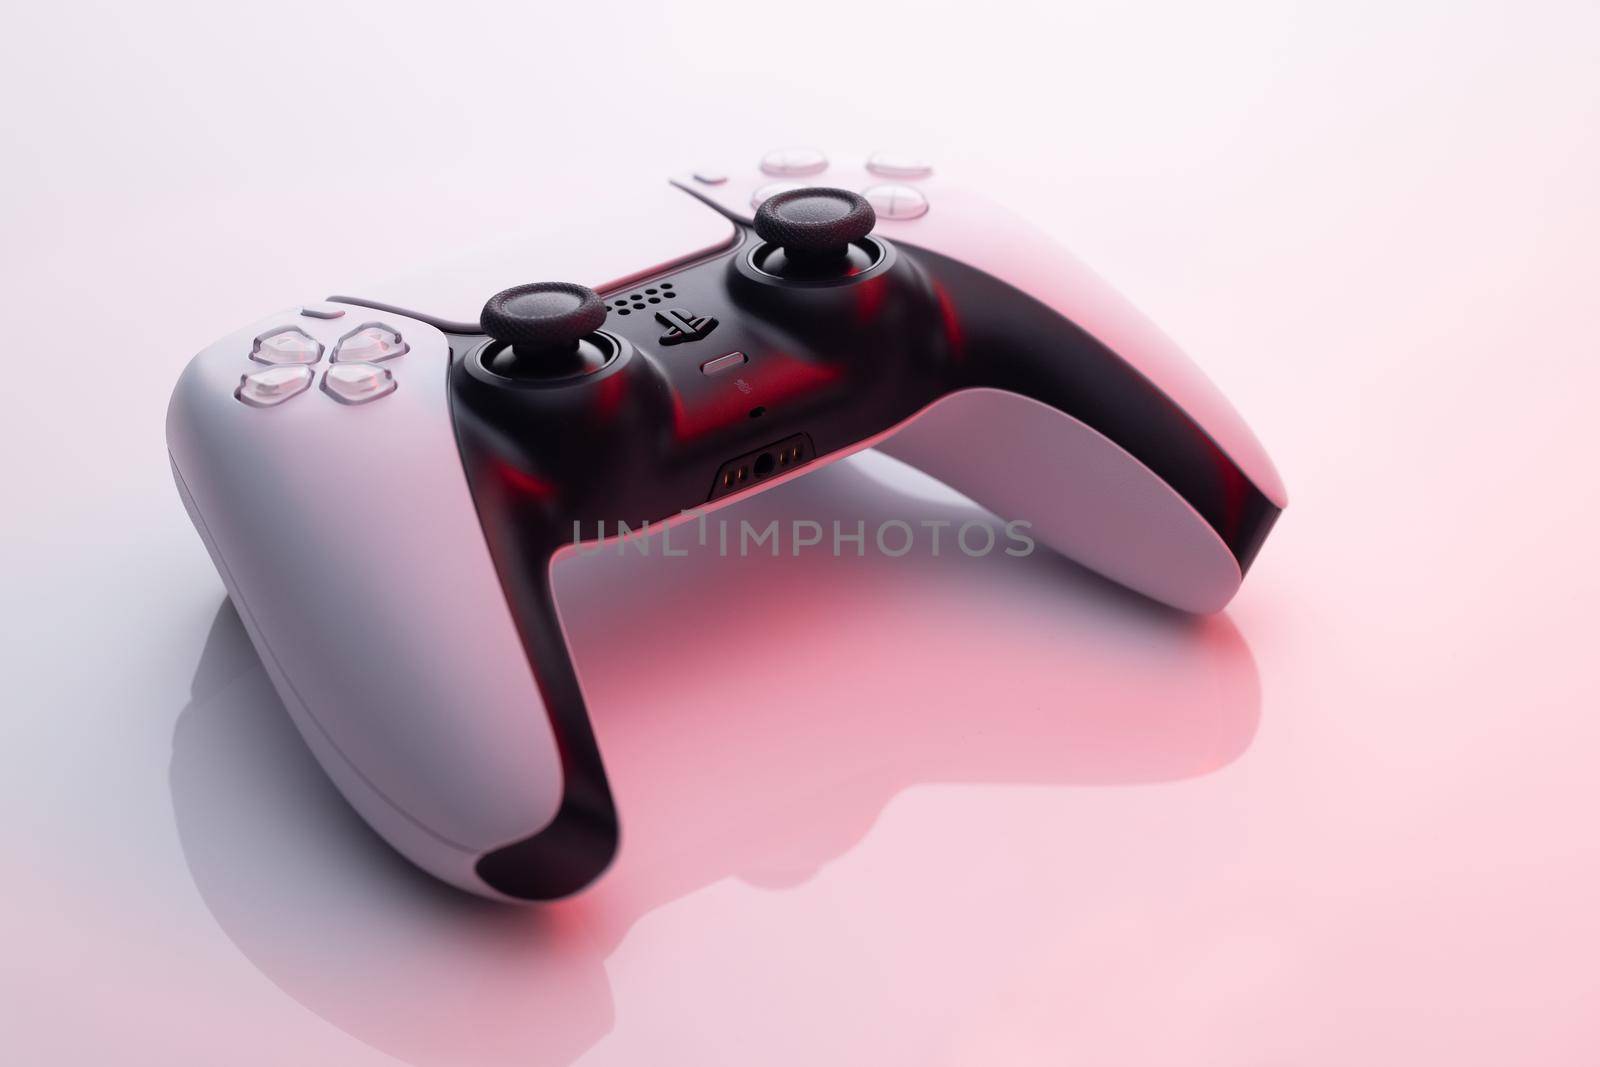 NEW YORK - March 3, 2021: Sony Playstation 5 Dualsense game controller. New product from Sony, wireless white PlayStation 5. White controller in red light. by uflypro